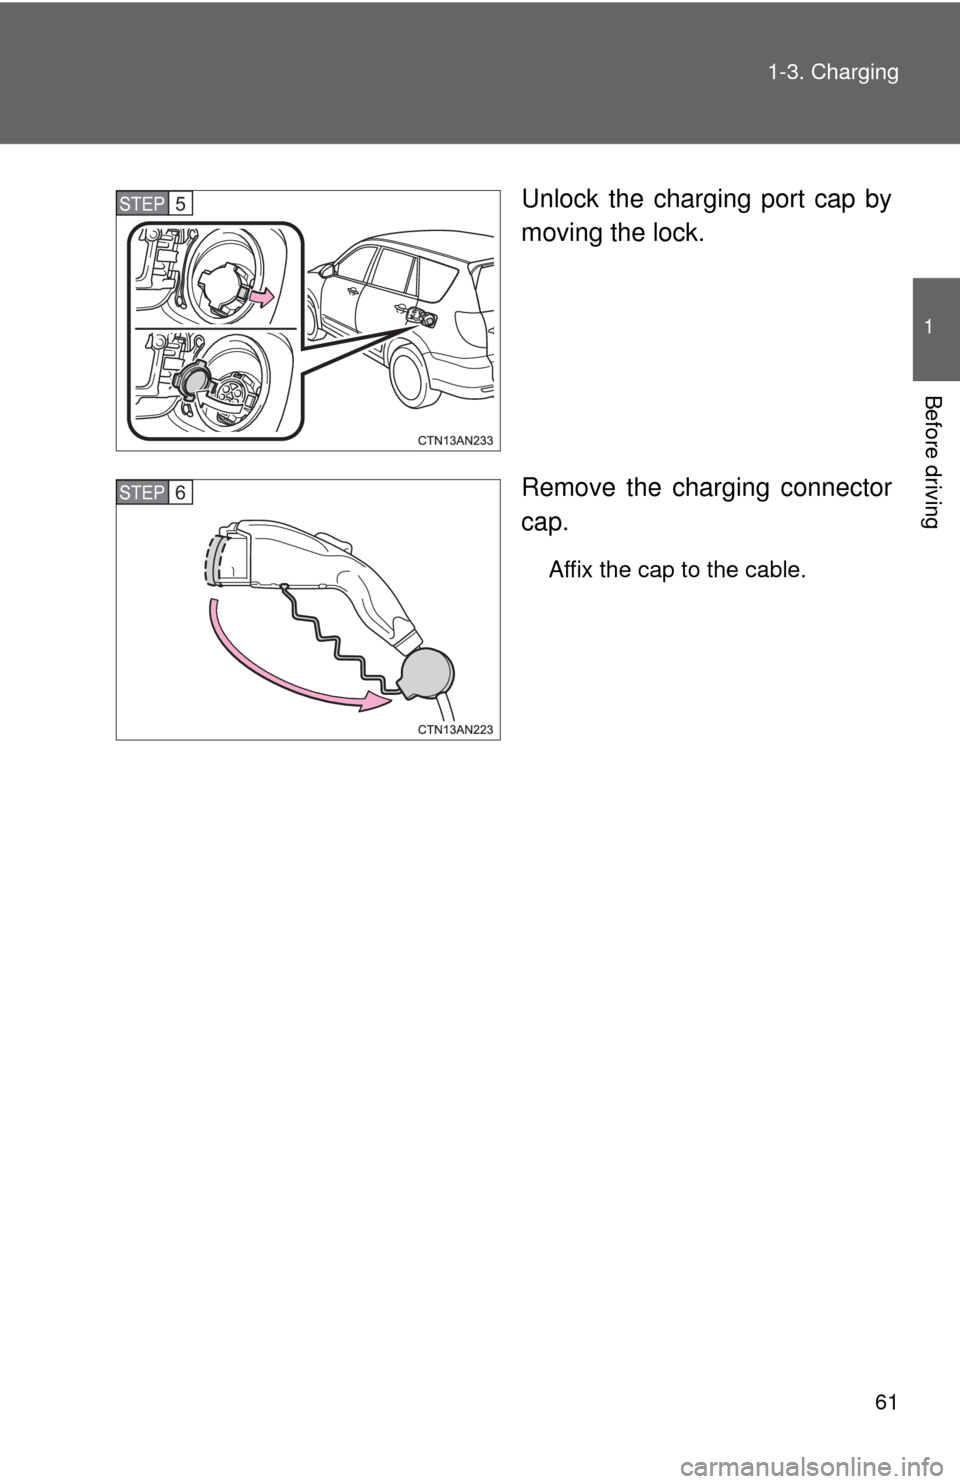 TOYOTA RAV4 EV 2012 1.G Owners Manual 61
1-3. Charging
1
Before driving
Unlock the charging port cap by
moving the lock.
Remove the charging connector
cap.
Affix the cap to the cable.
STEP 5 
STEP 6  